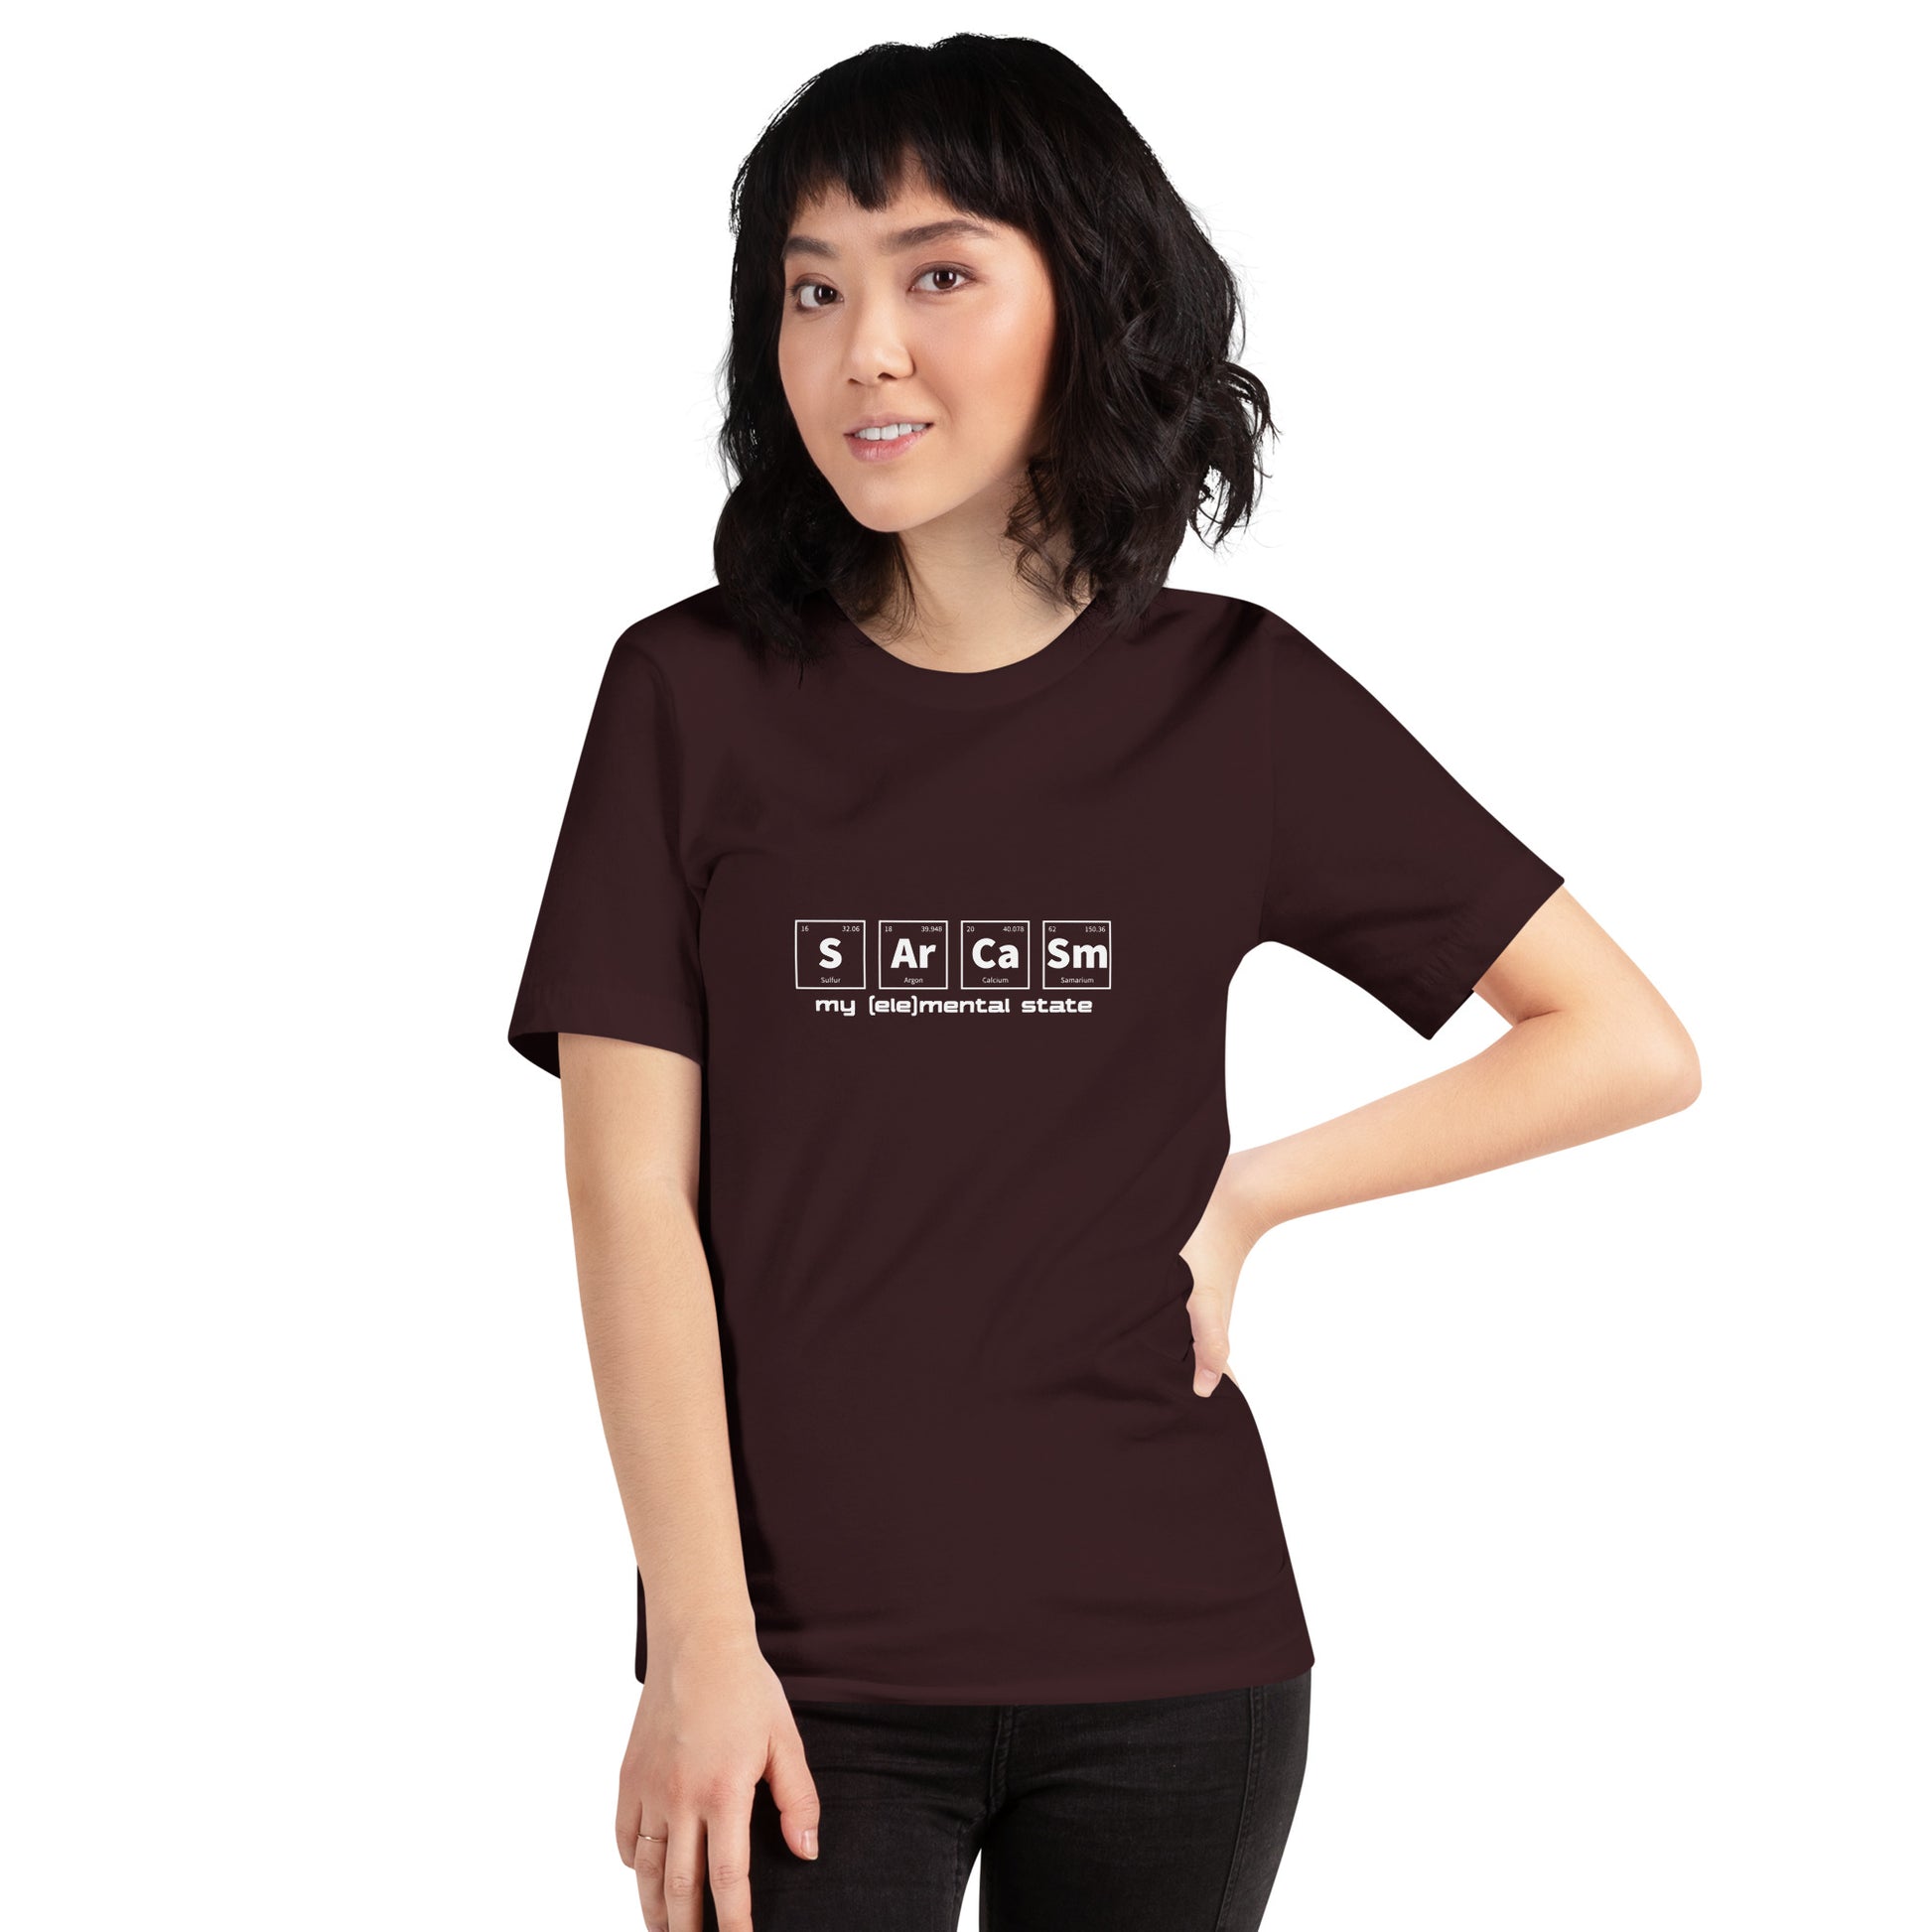 Model wearing Oxblood Black t-shirt with graphic of periodic table of elements symbols for Sulfur (S), Argon (Ar), Calcium (Ca), and Samarium (Sm) and text "my (ele)mental state"